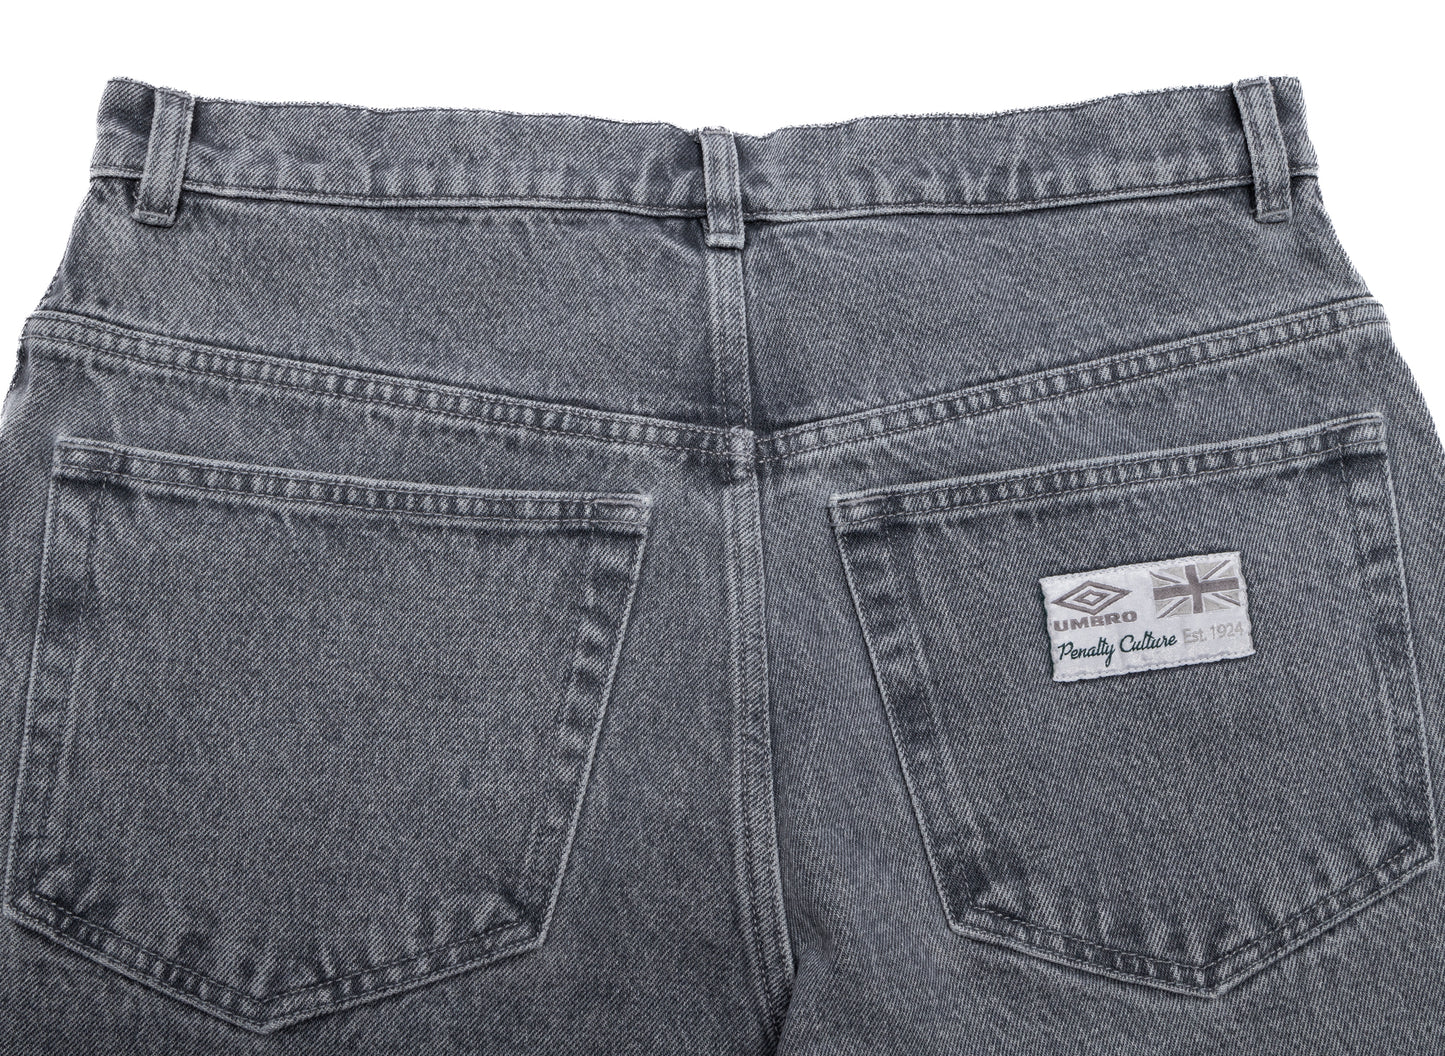 Umbro Penalty Culture Lasered Logo Jeans xld